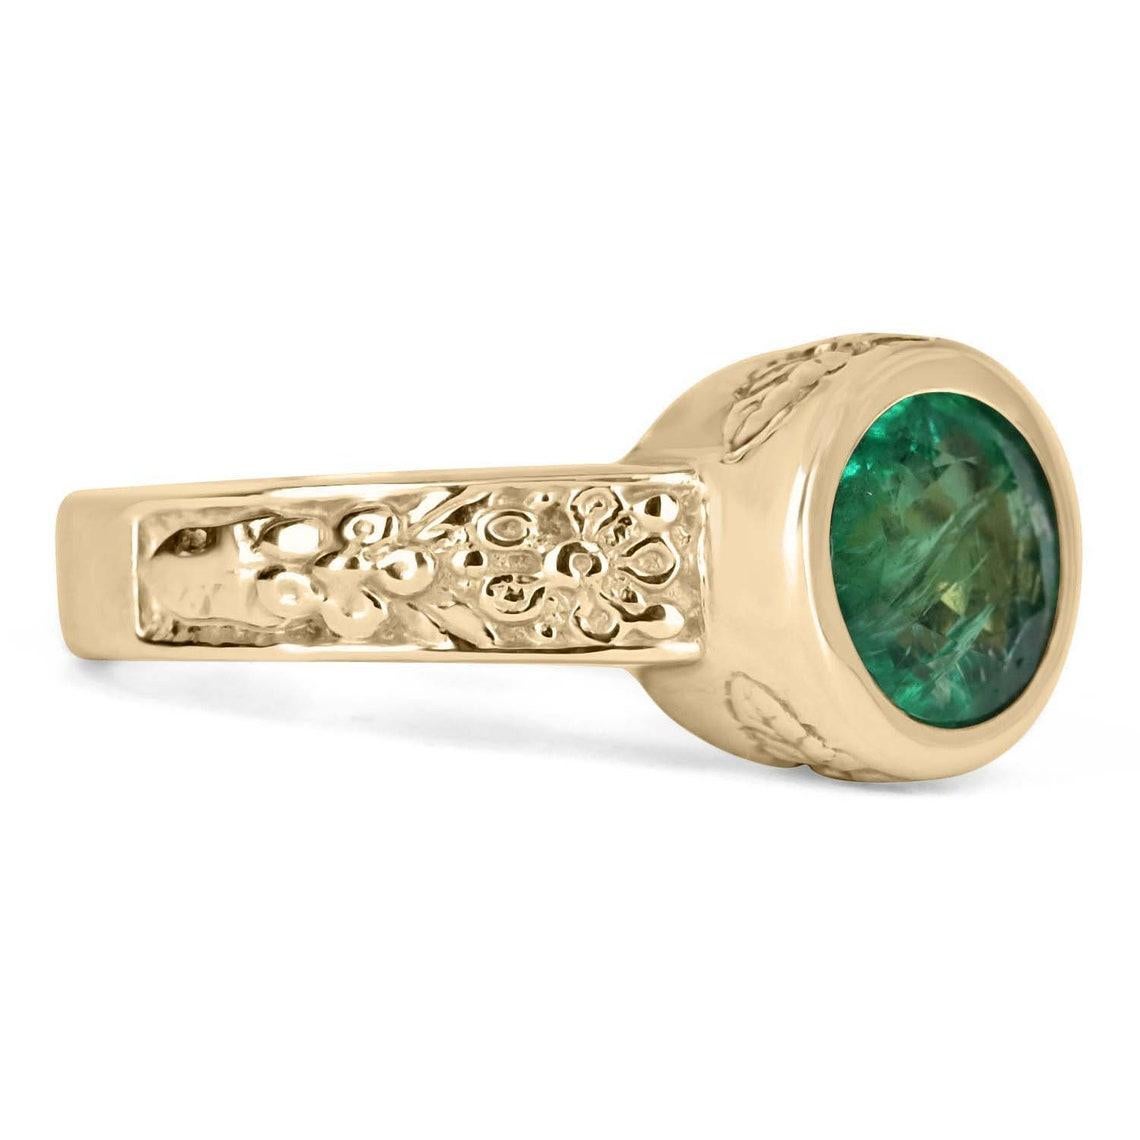 Featured here is a 3.20-carat oval, East to West solitaire 14k gold ring. The center stone is an oval emerald with beautiful eye clarity and transparency. The emerald has imperfections to the eye that blend with the beauty of the stone and make it